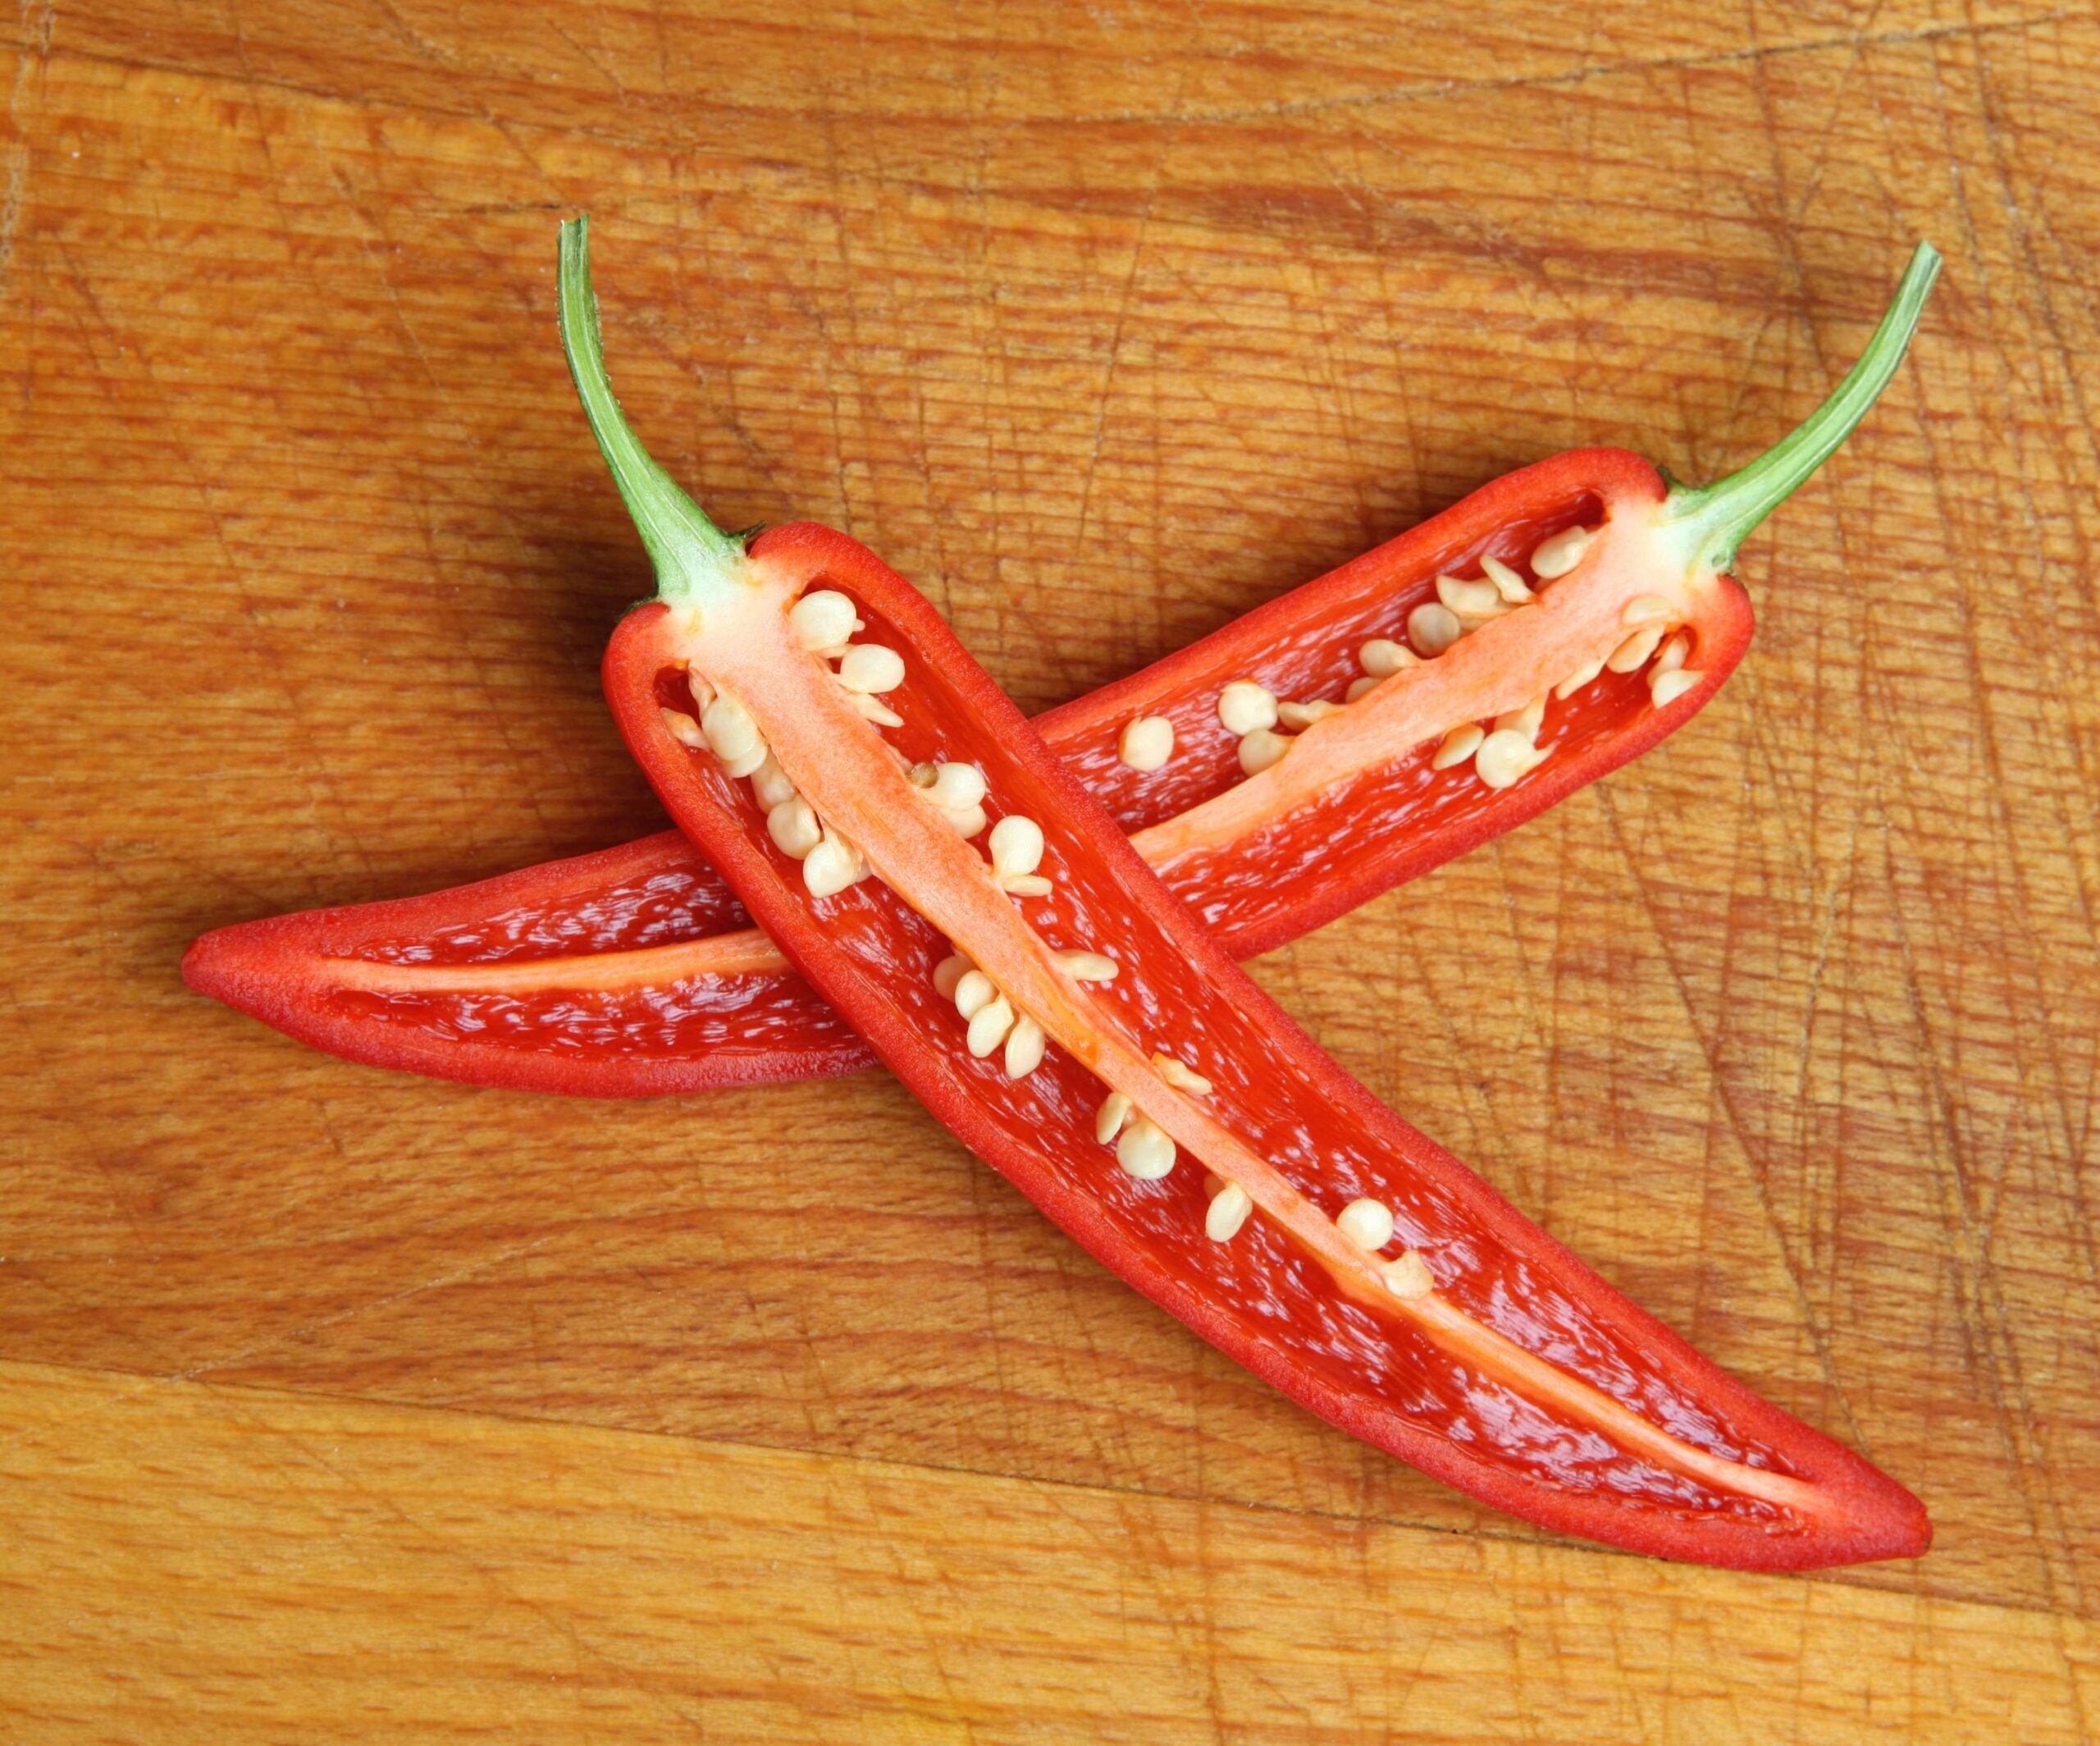 red chili pepper sliced open to show seeds